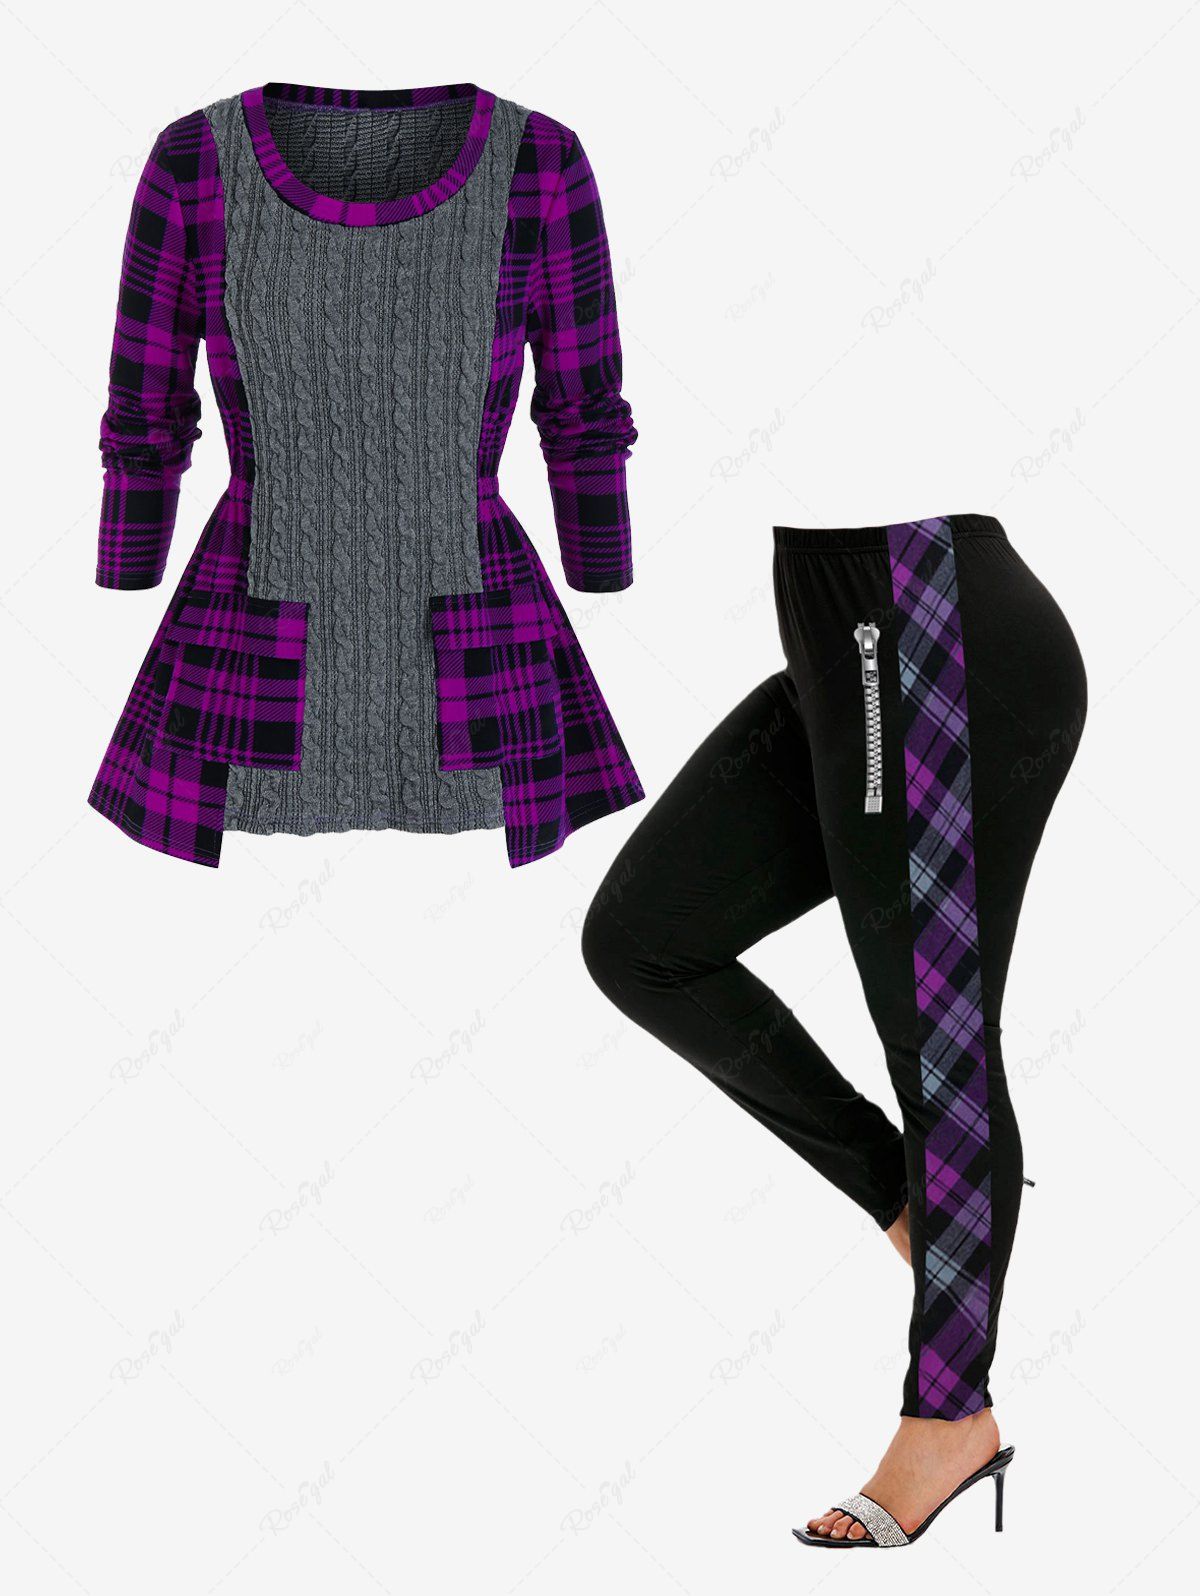 New Plaid Cable Knit Mixed-media Sweater and High Waist 3D Zipper Print Plaid Leggings Plus Size Outerwear Outfit  